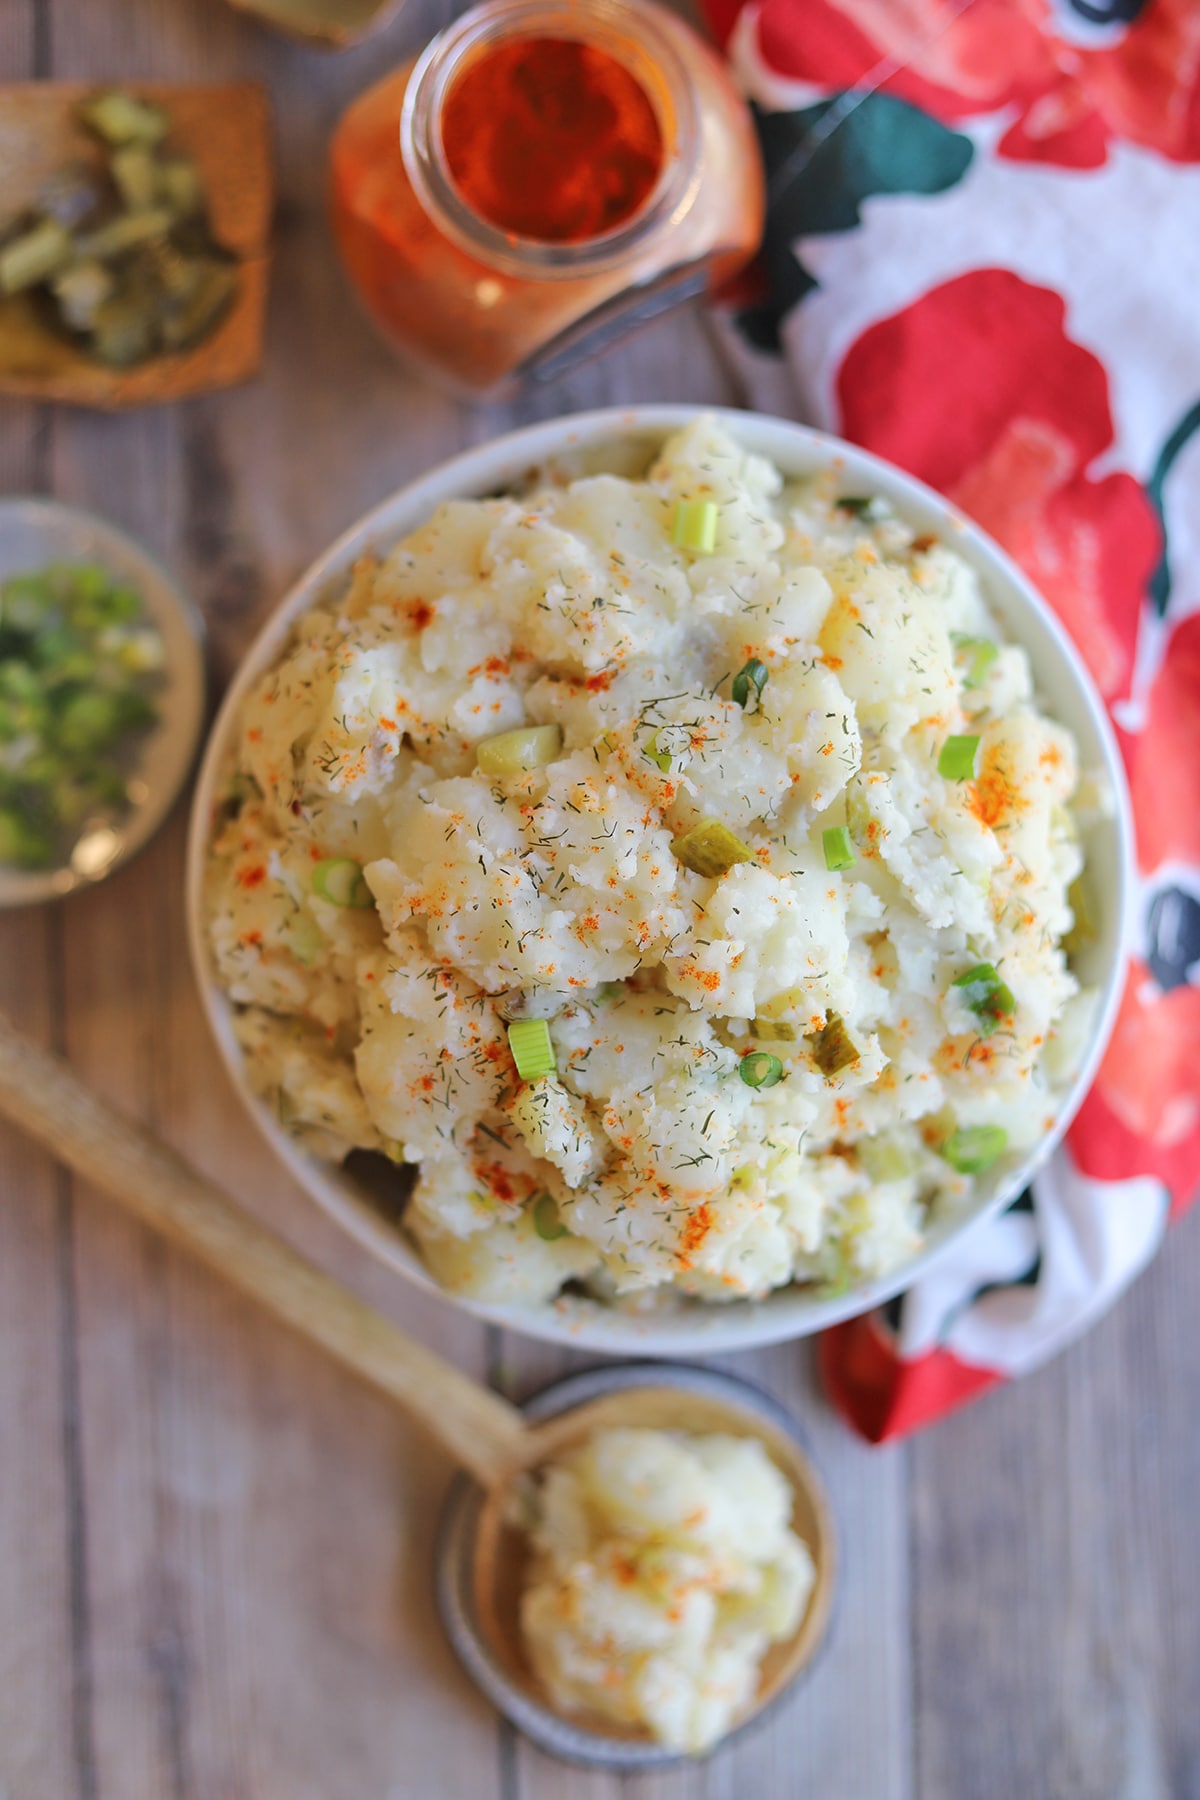 Overhead bowl of potato salad, paprika, green onions, and dill pickle pieces.